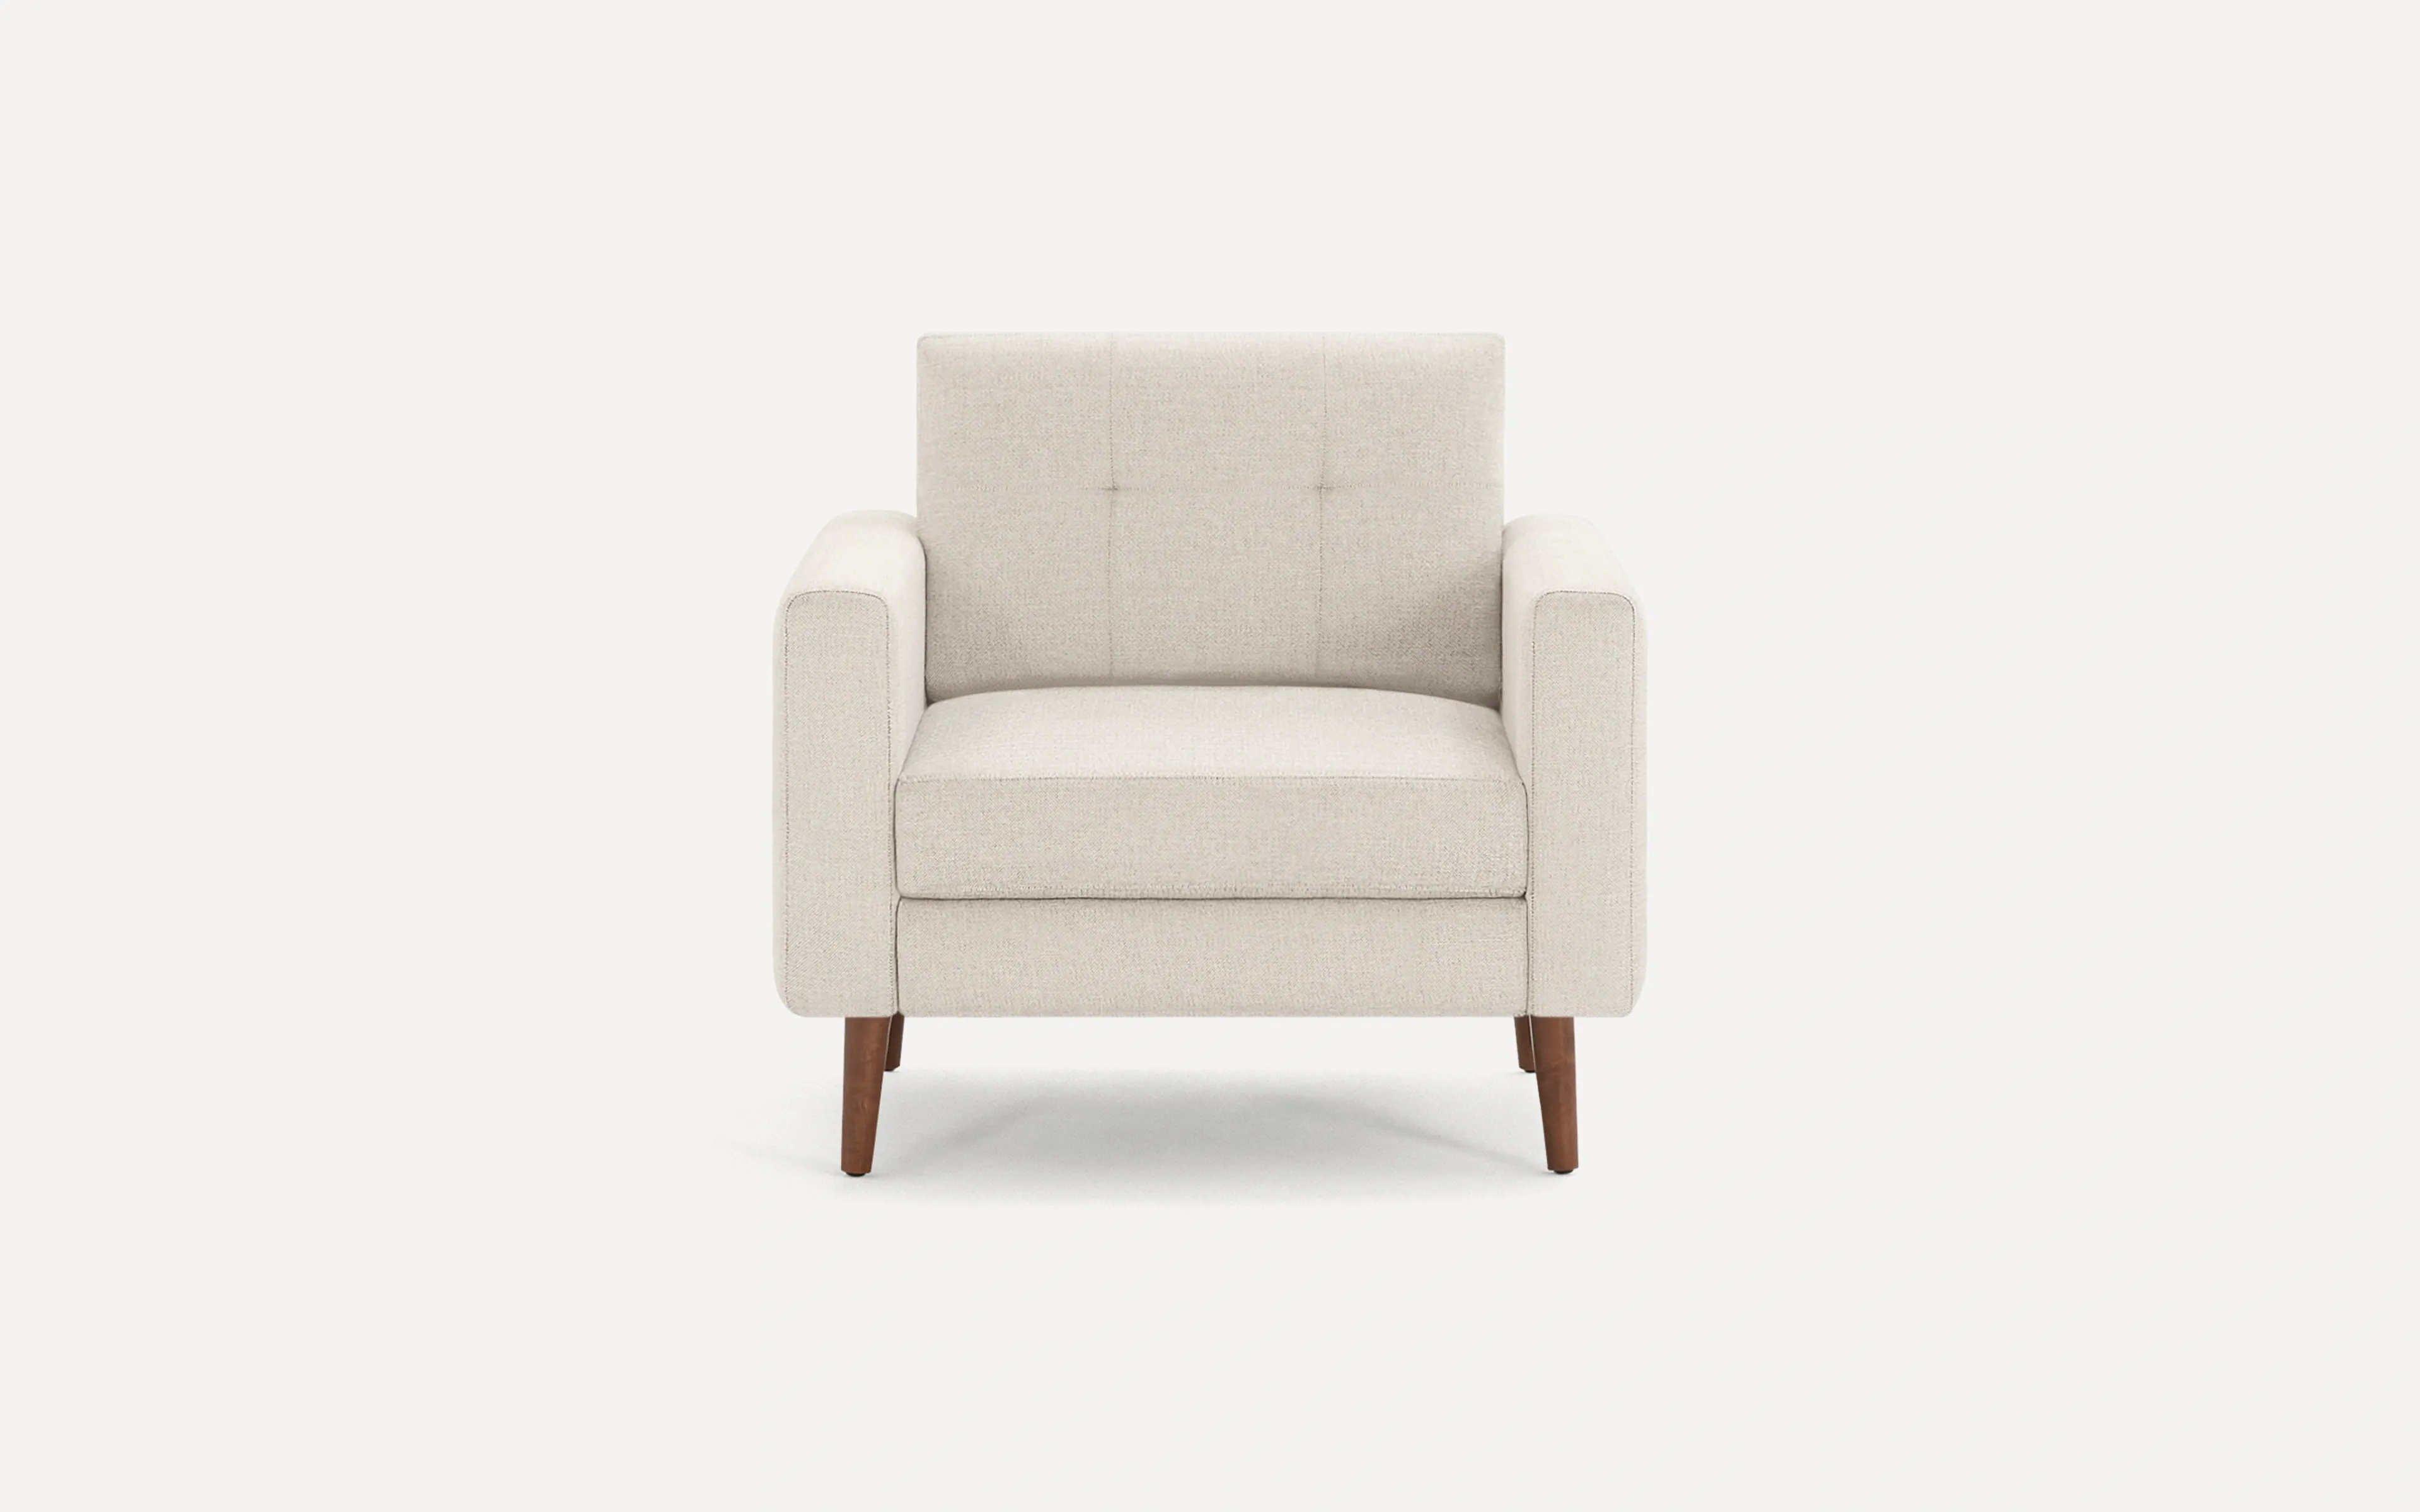 Original Nomad Armchair in Ivory Fabric